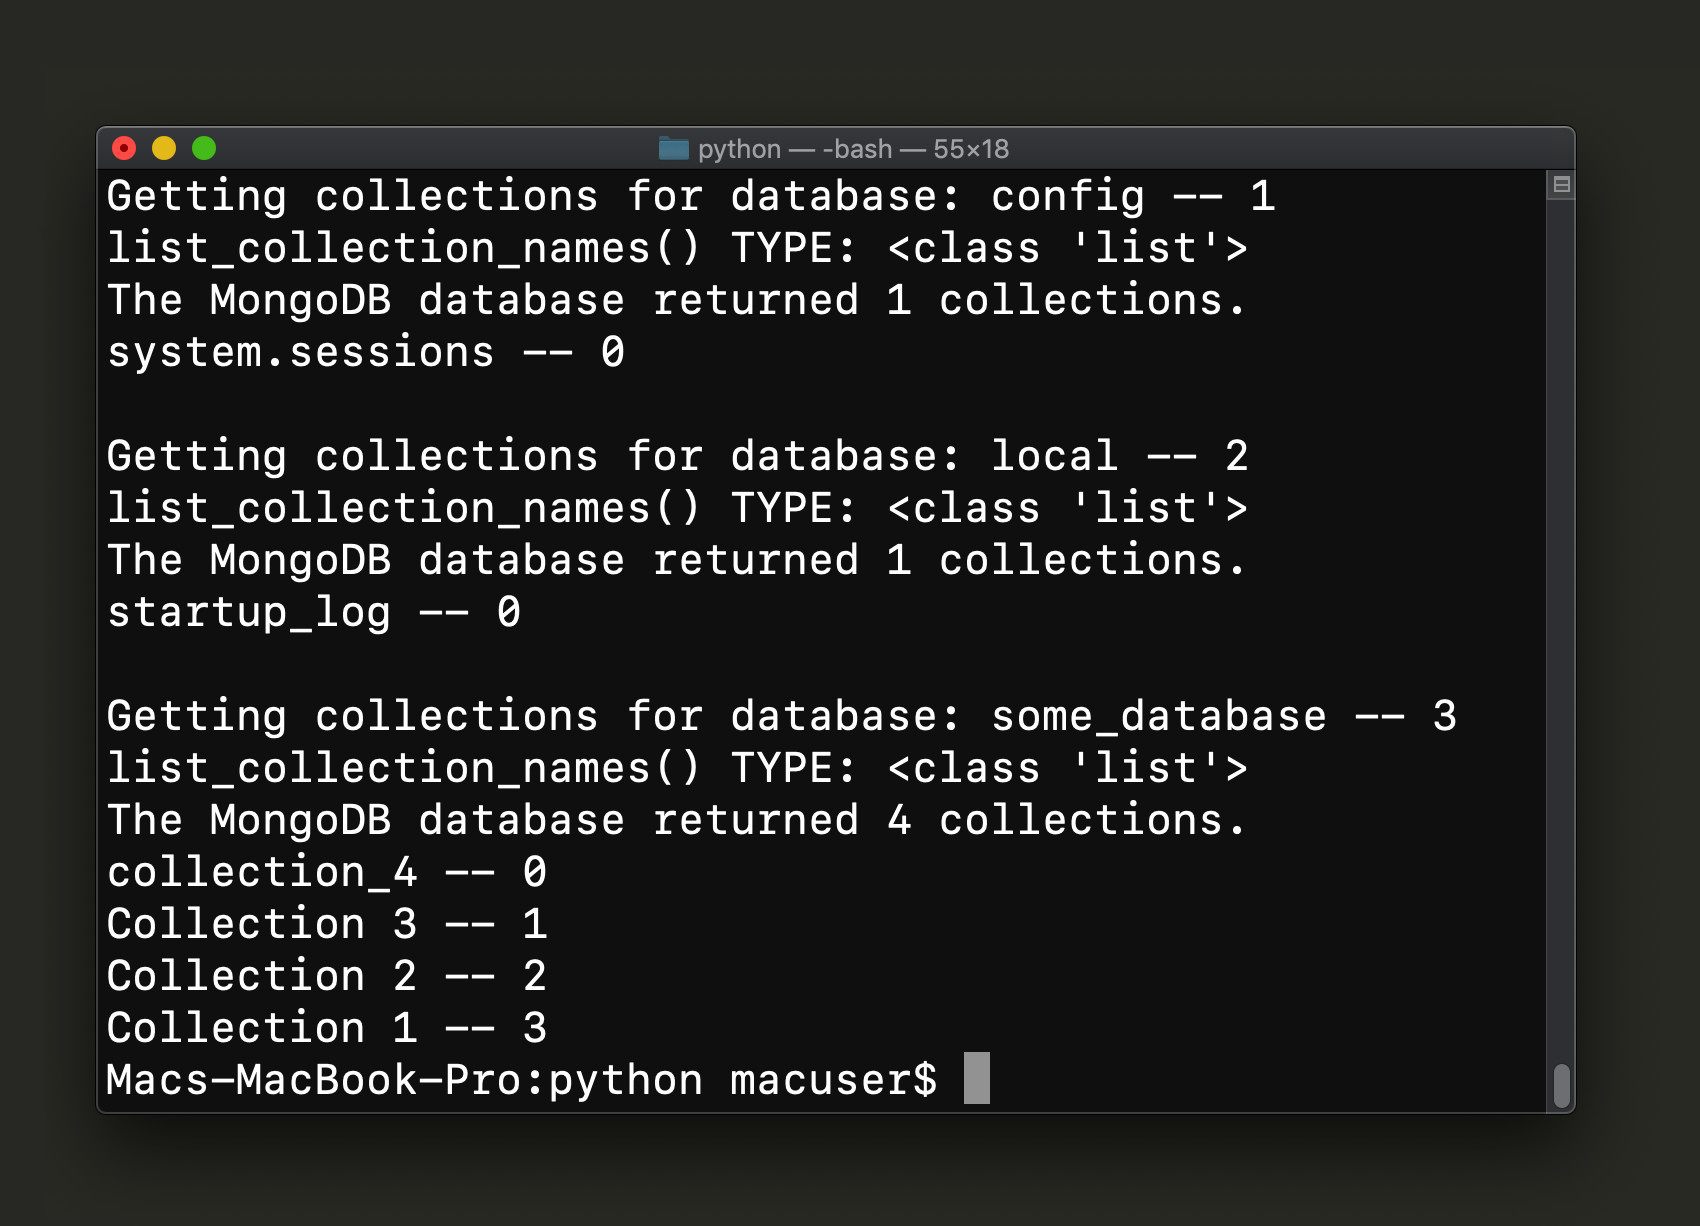 Screenshot of a Python script running in a terminal window to get MongoDB database and collection names